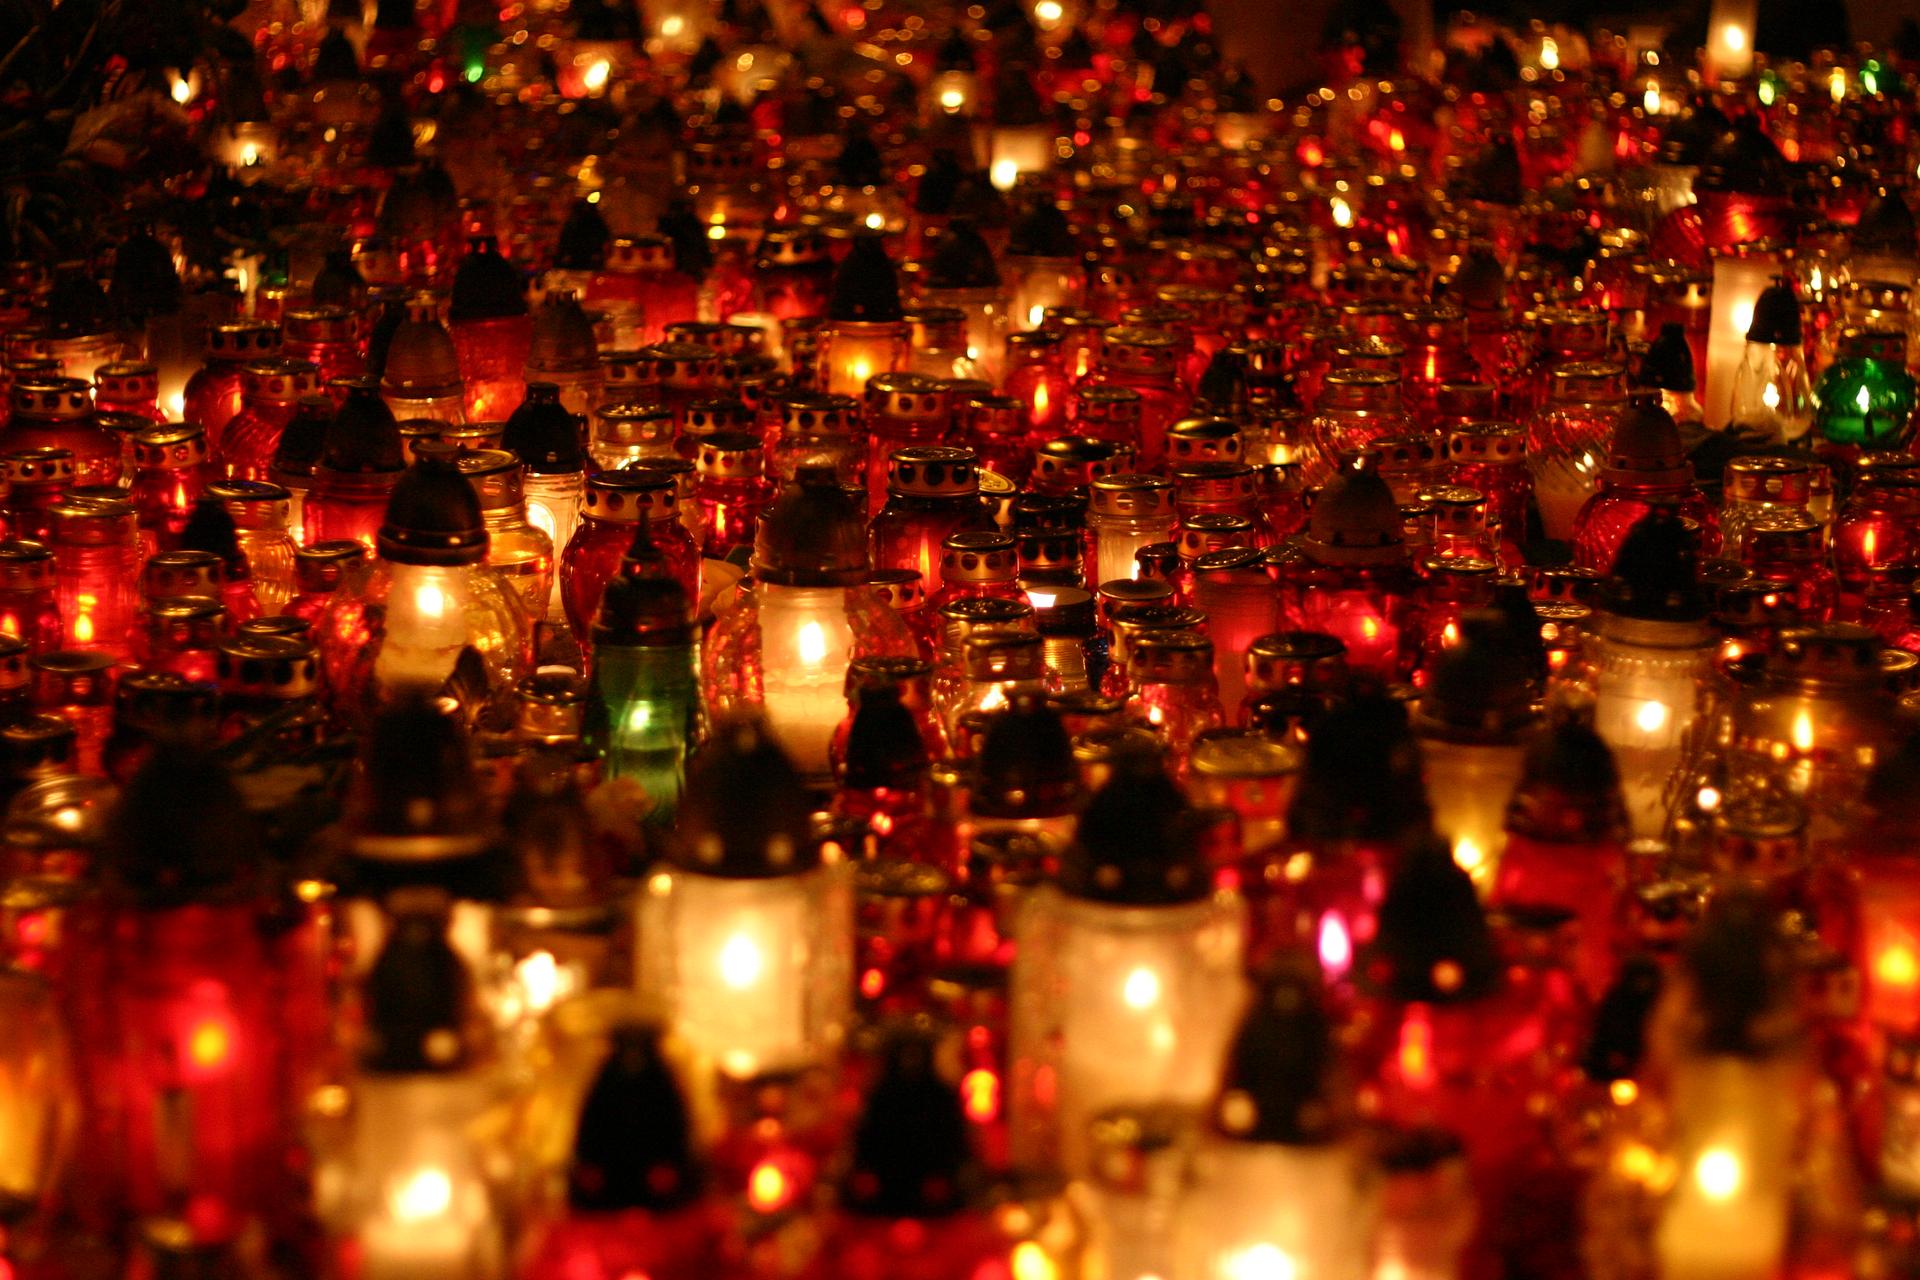 Thousands of candlelights lit in front of Poland's presidential palace in memory of the victims of a fatal plane crash. Warsaw, April 2010. 